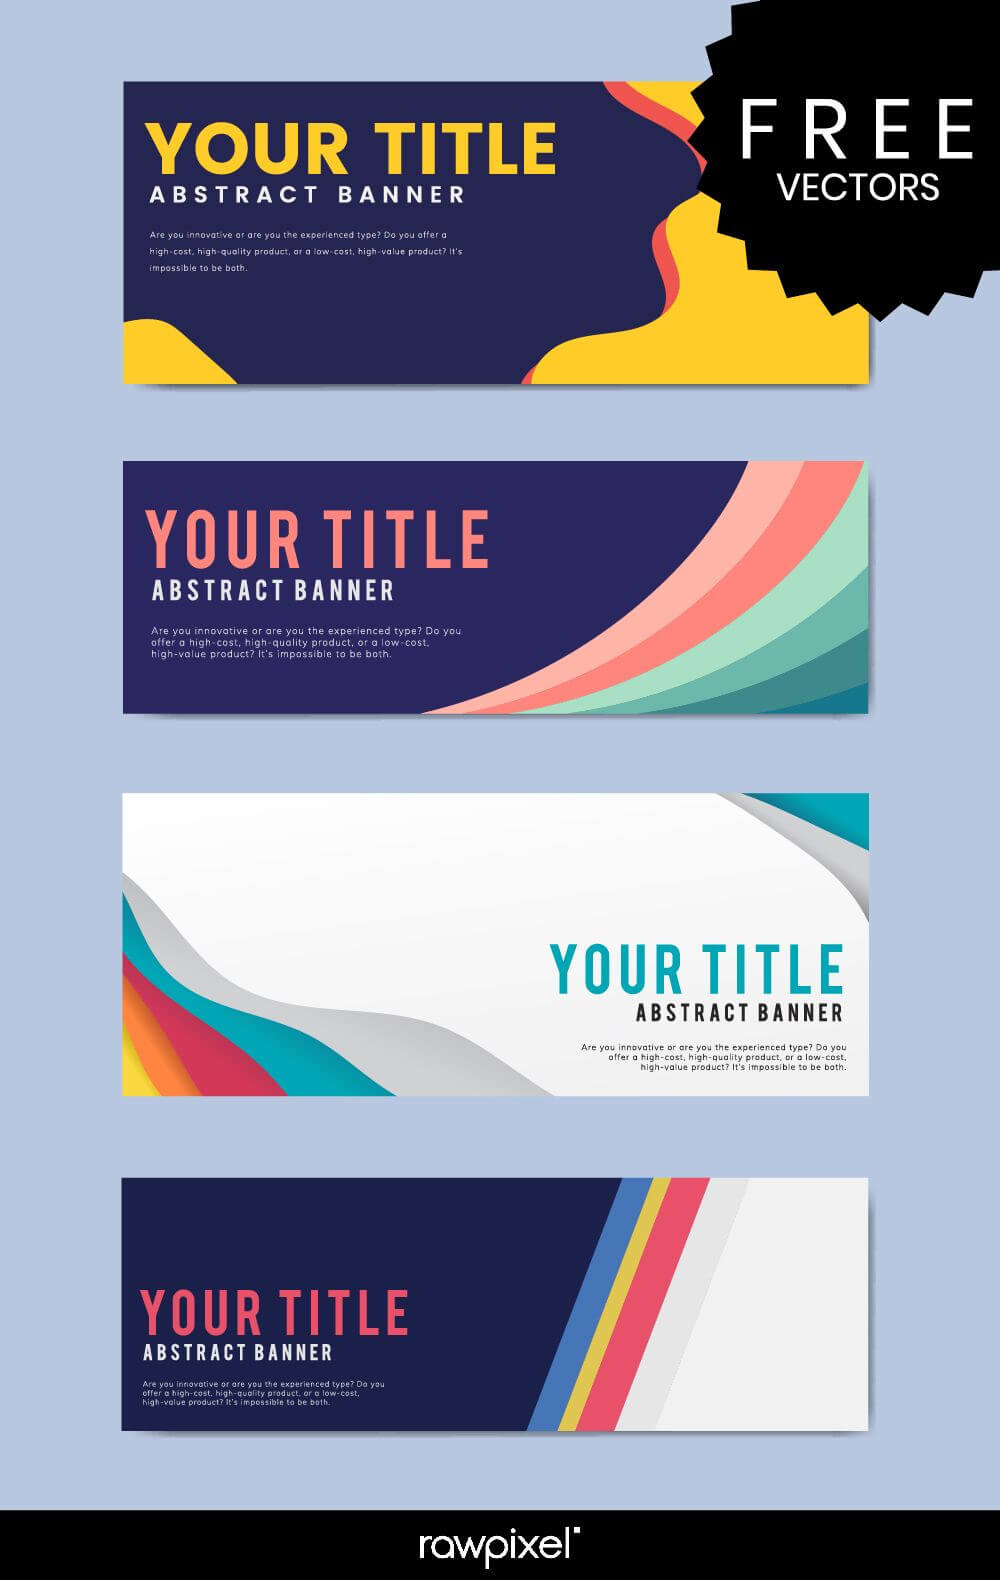 Download Free Modern Business Banner Templates At Rawpixel For Free Website Banner Templates Download